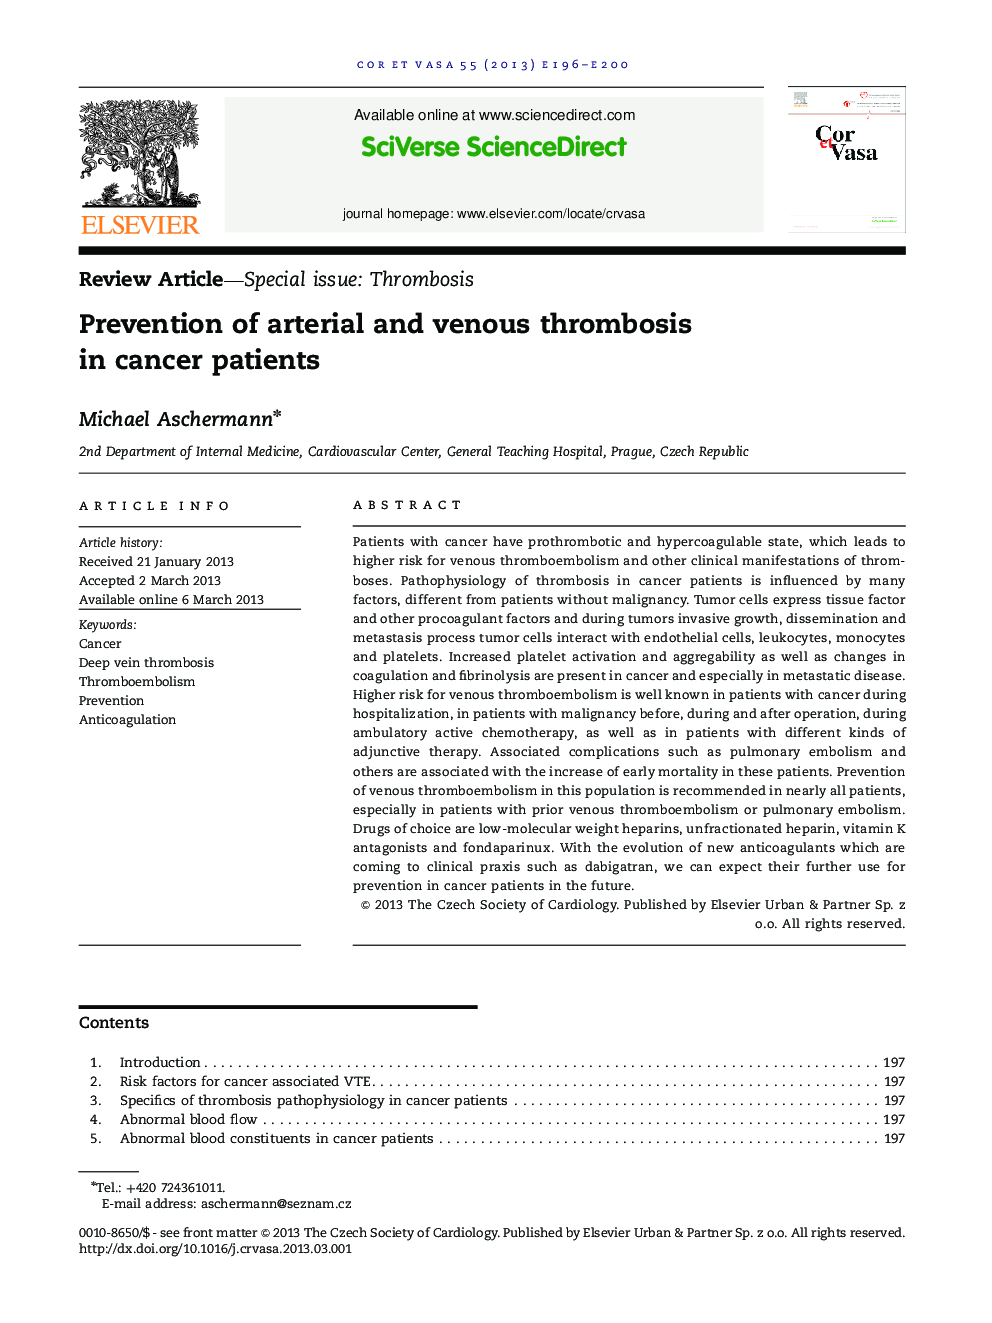 Prevention of arterial and venous thrombosis in cancer patients